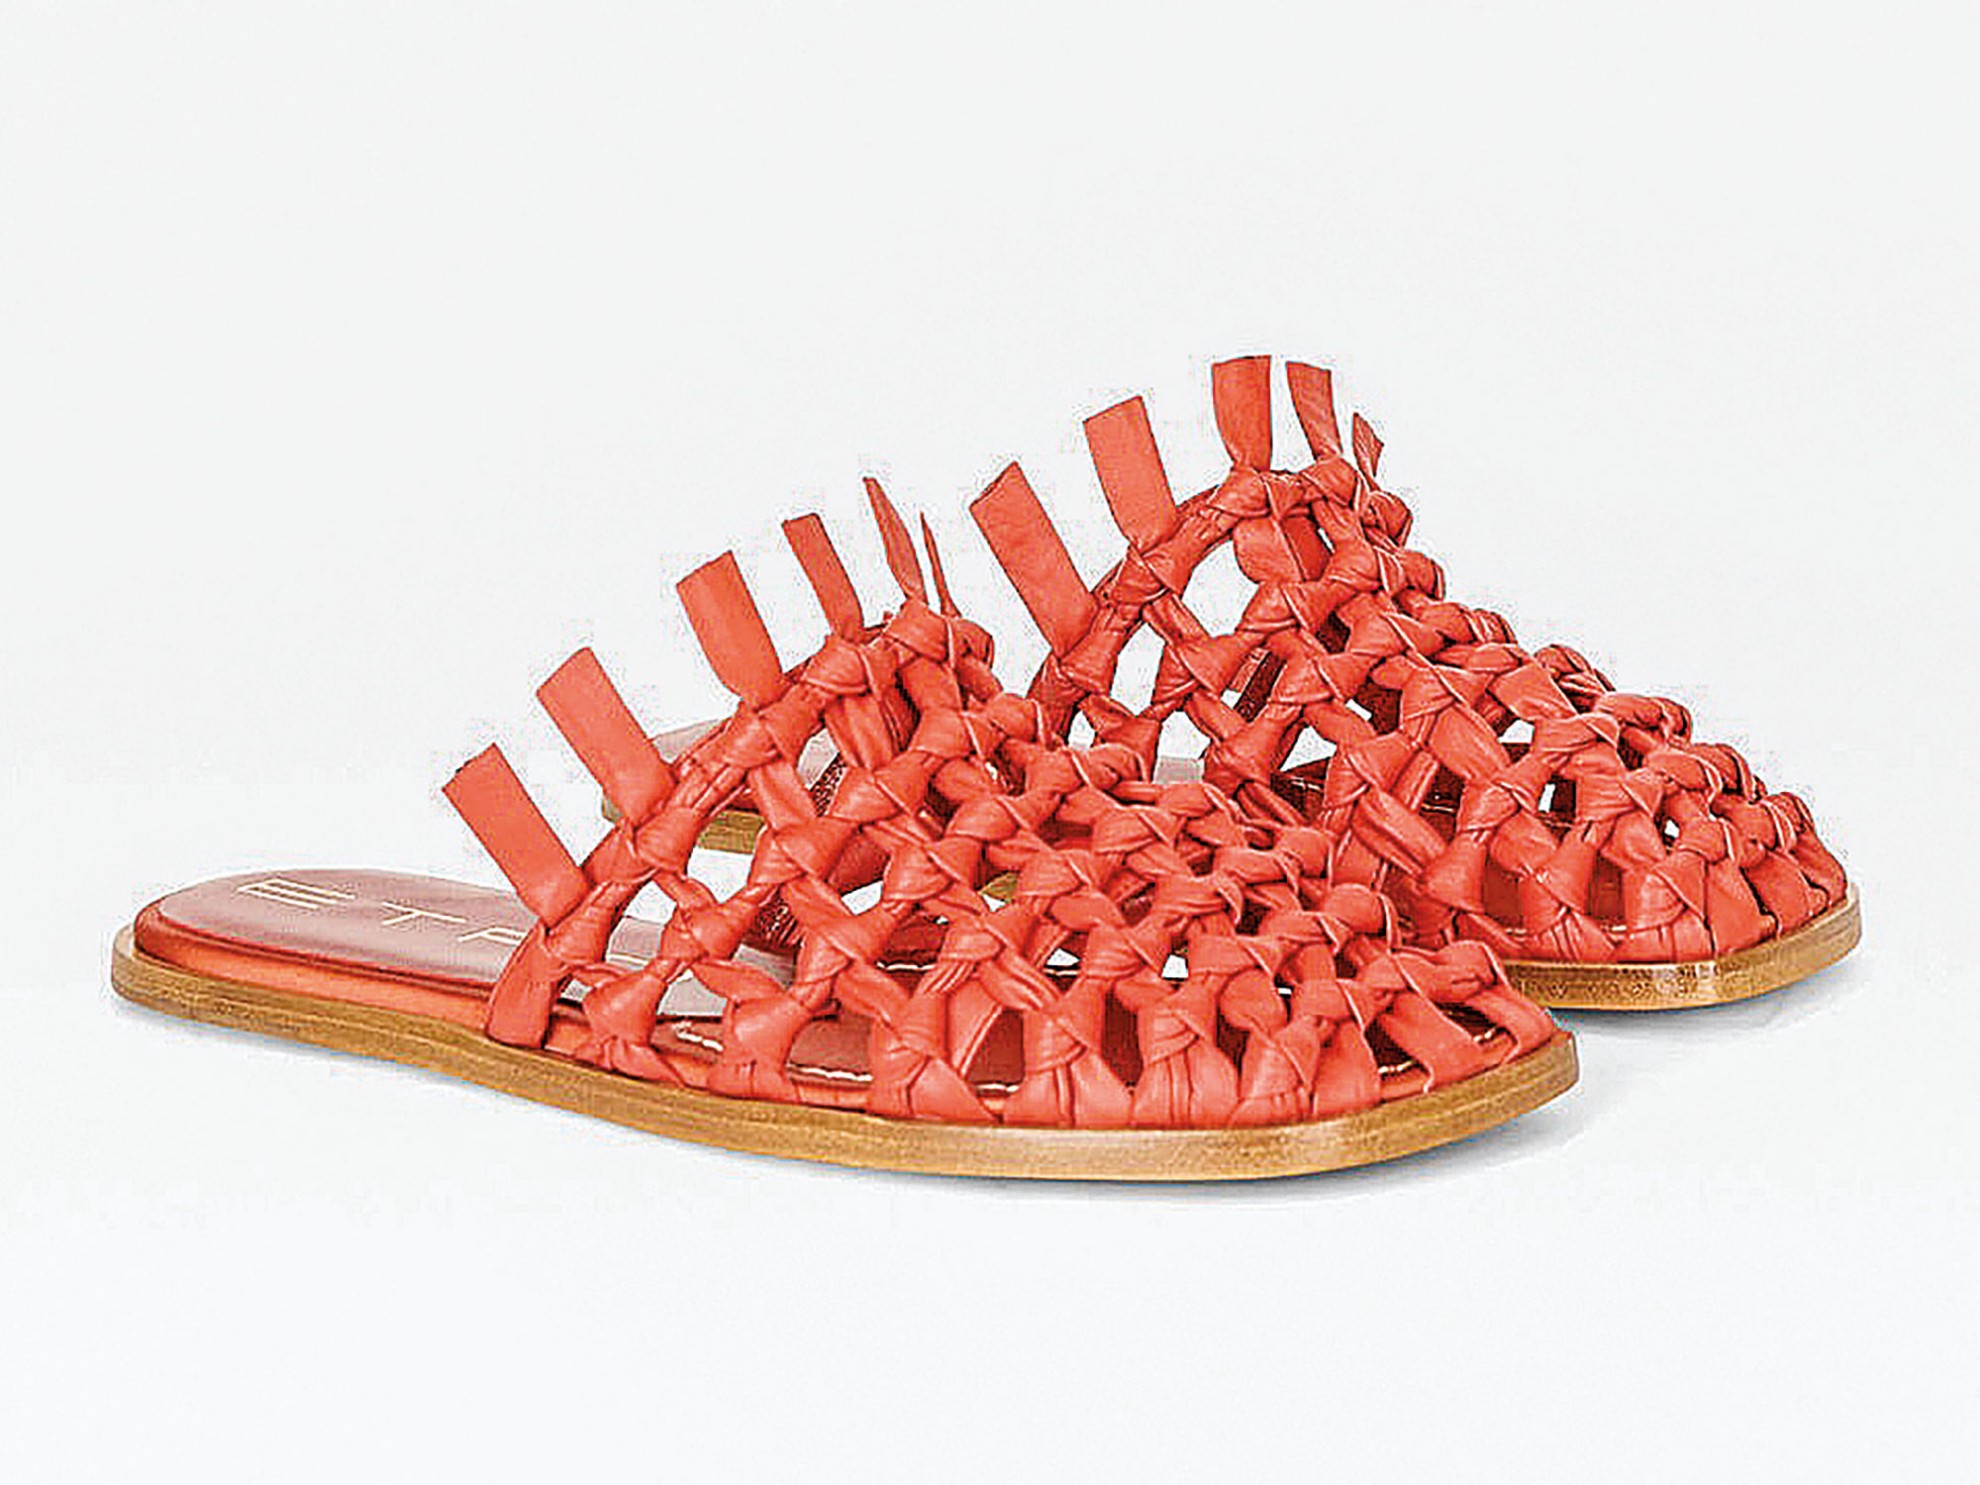 Flat mules with interwoven uppers